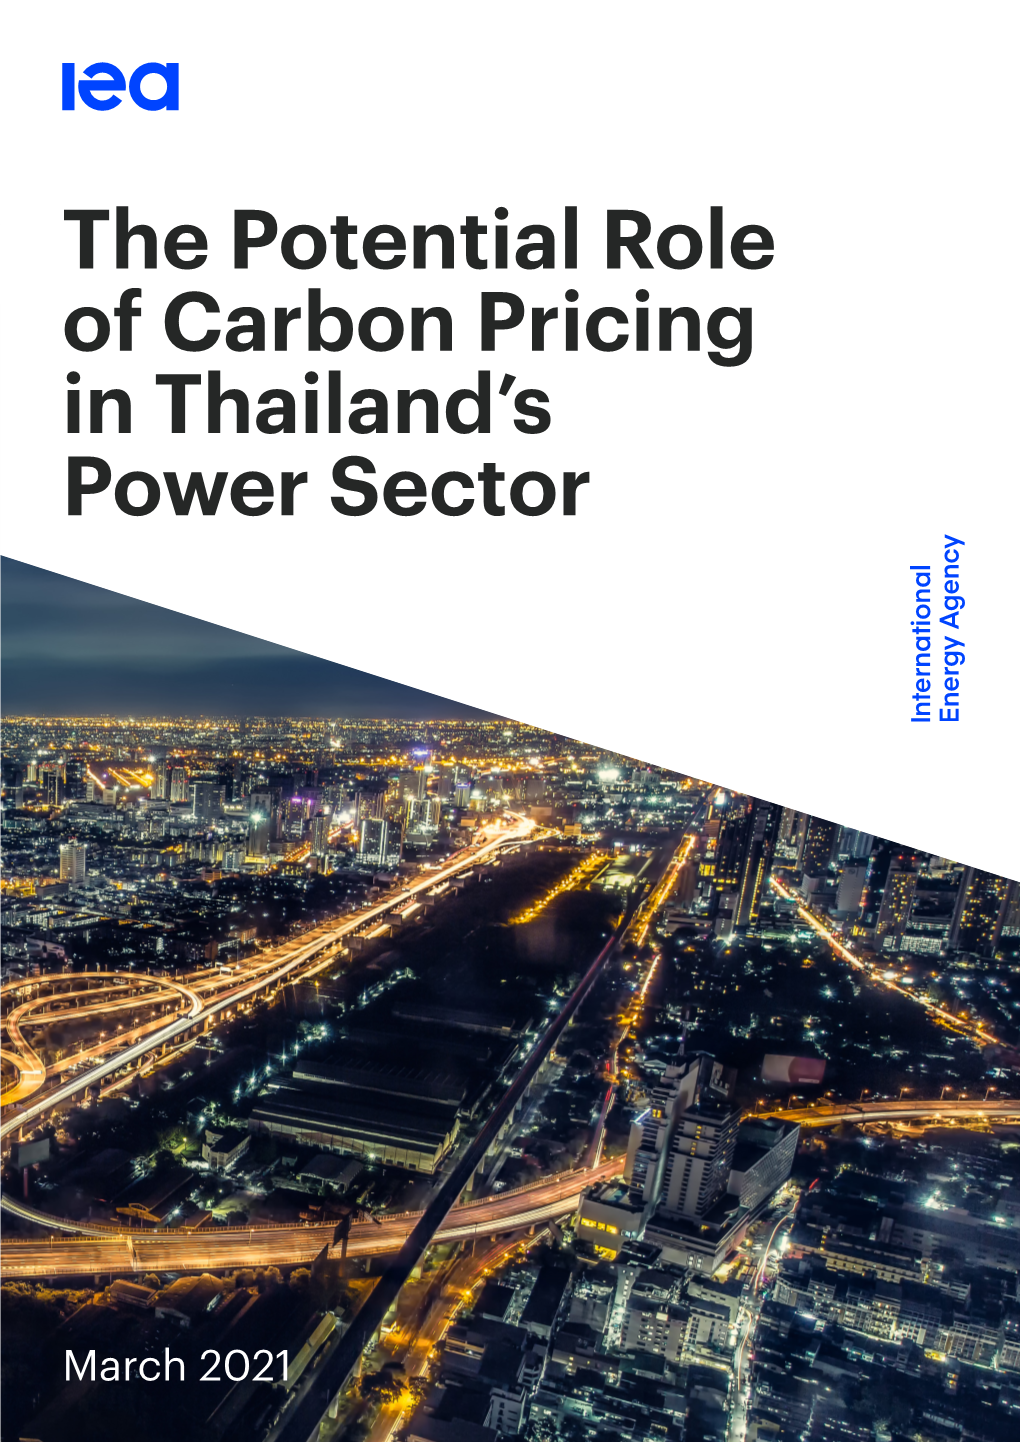 The Potential Role of Carbon Pricing in Thailand's Power Sector Abstract